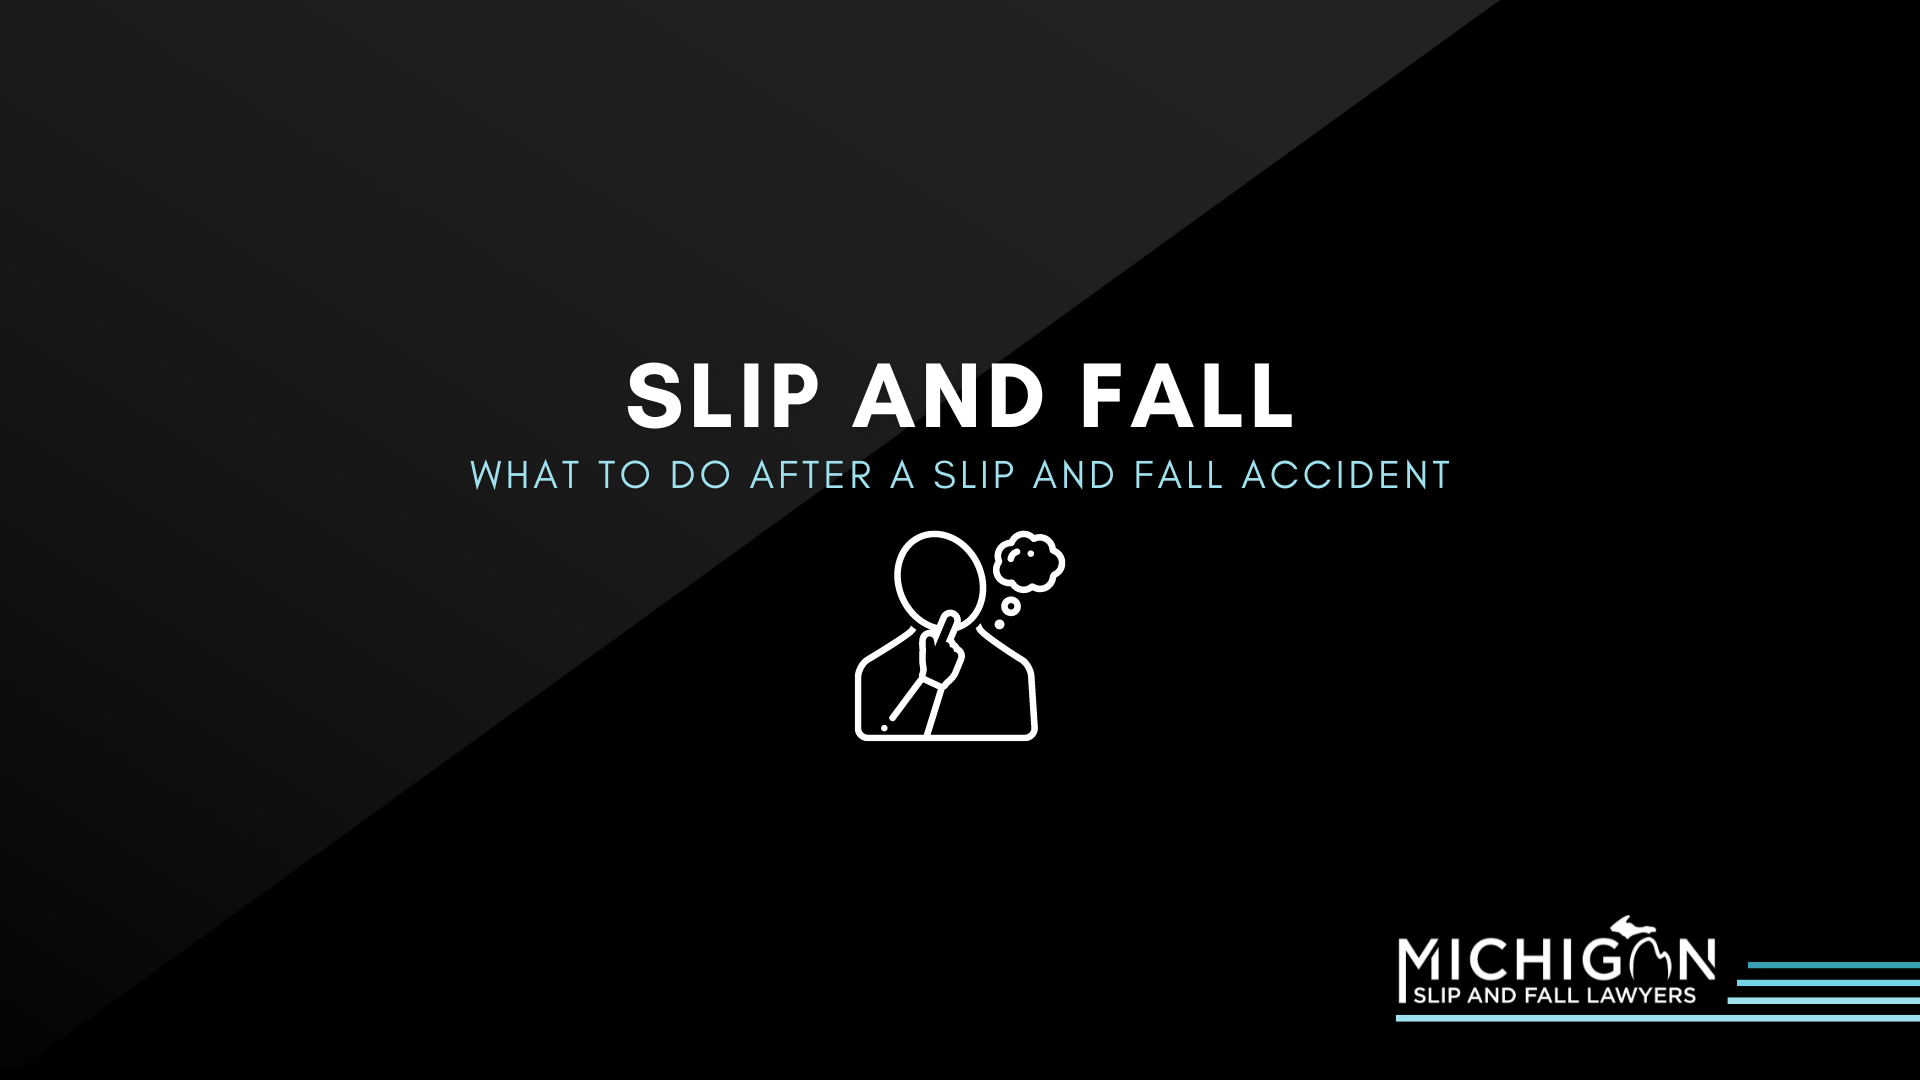 What To Do After A Slip And Fall Accident In Michigan: 7 Steps To Take